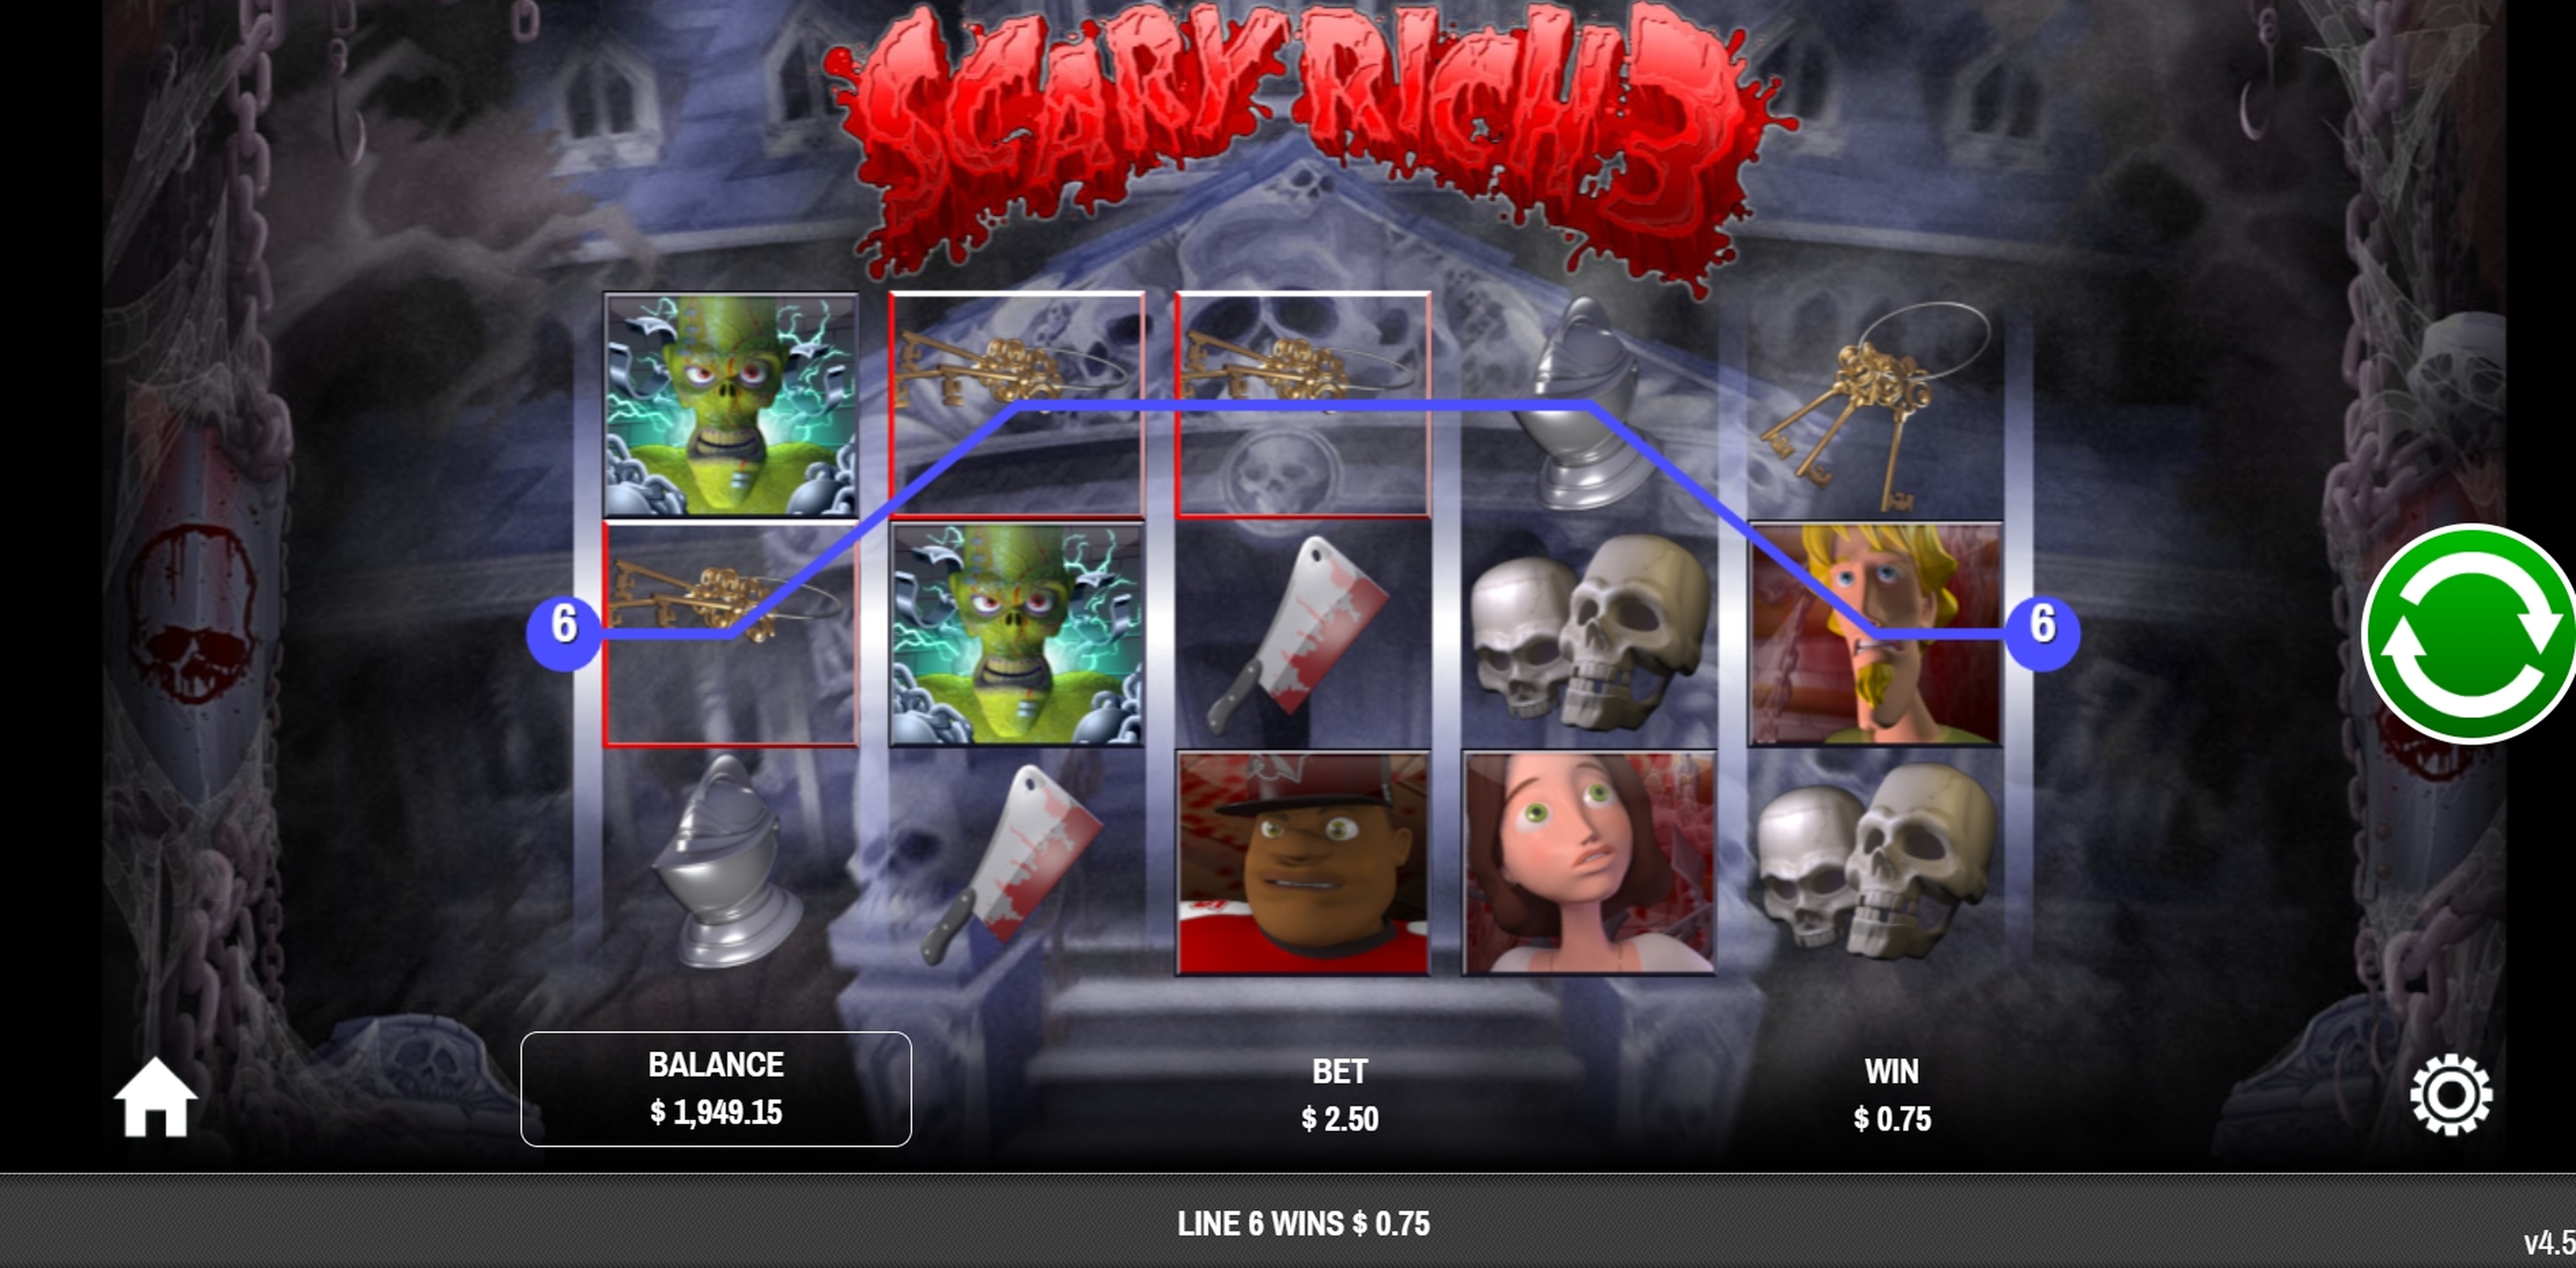 Win Money in Scary Rich 3 Free Slot Game by Rival